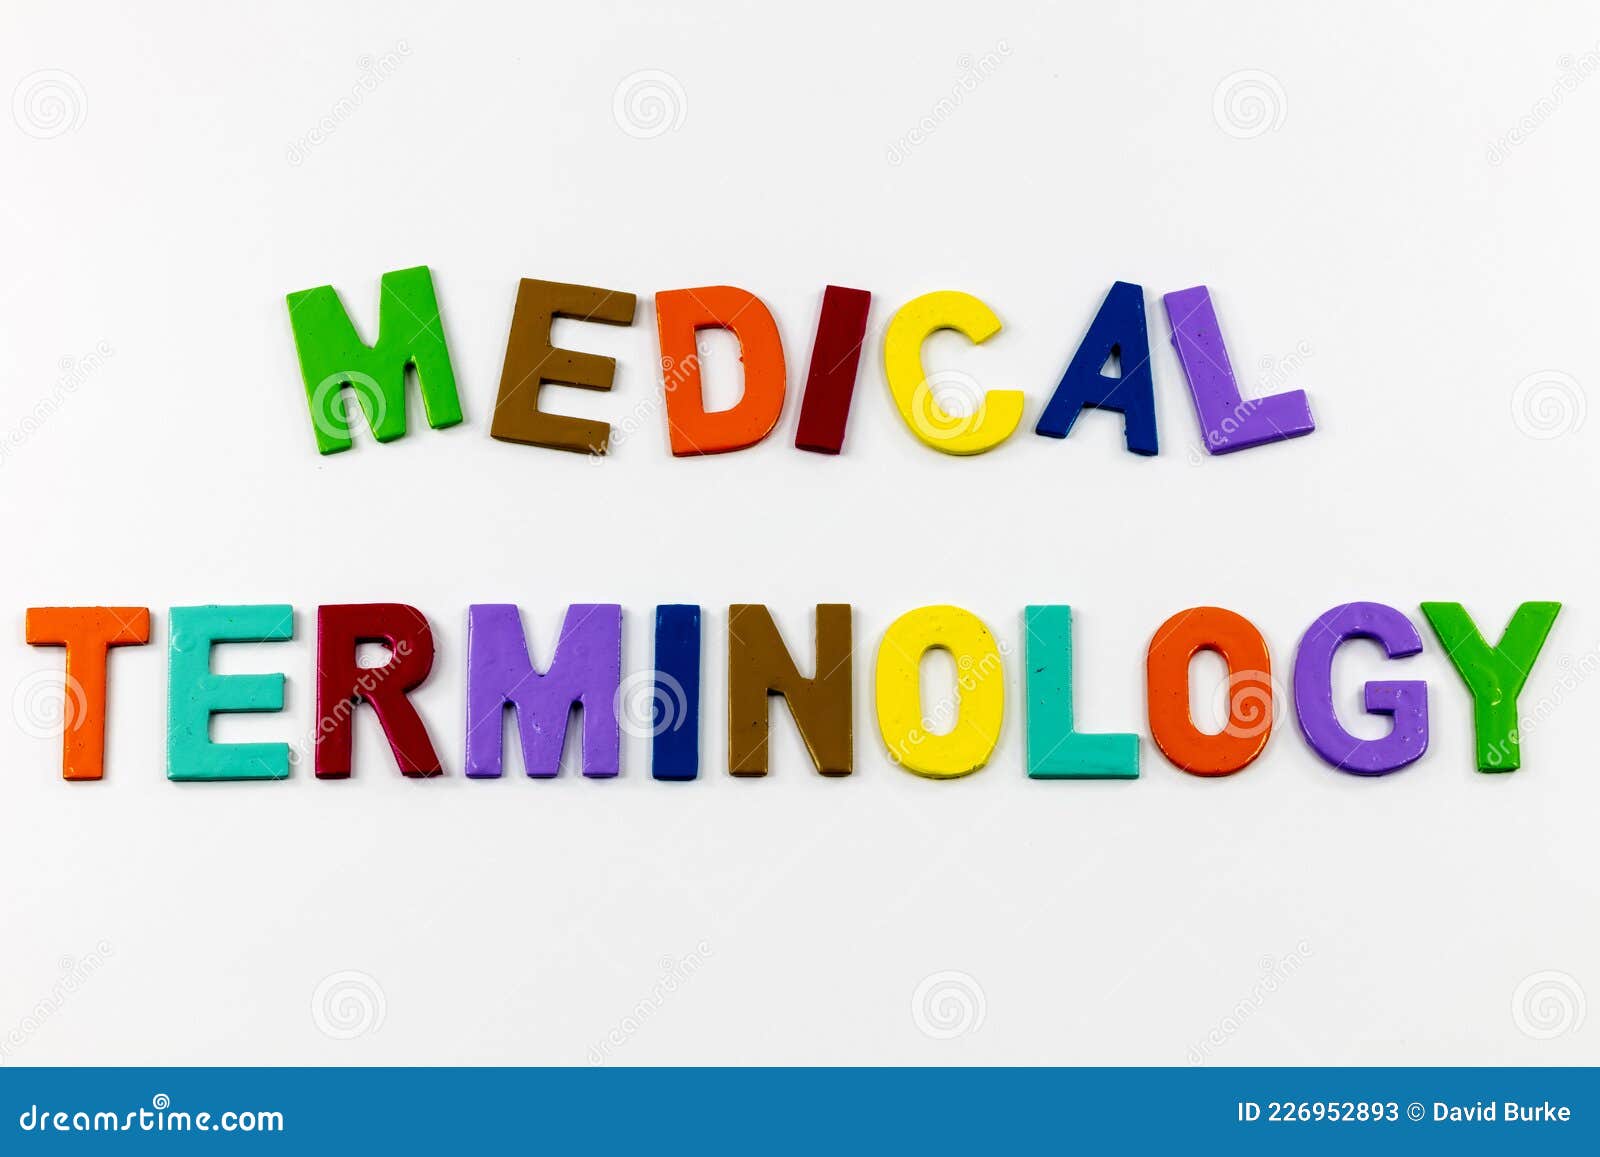 medical terminology information medicare insurance payment